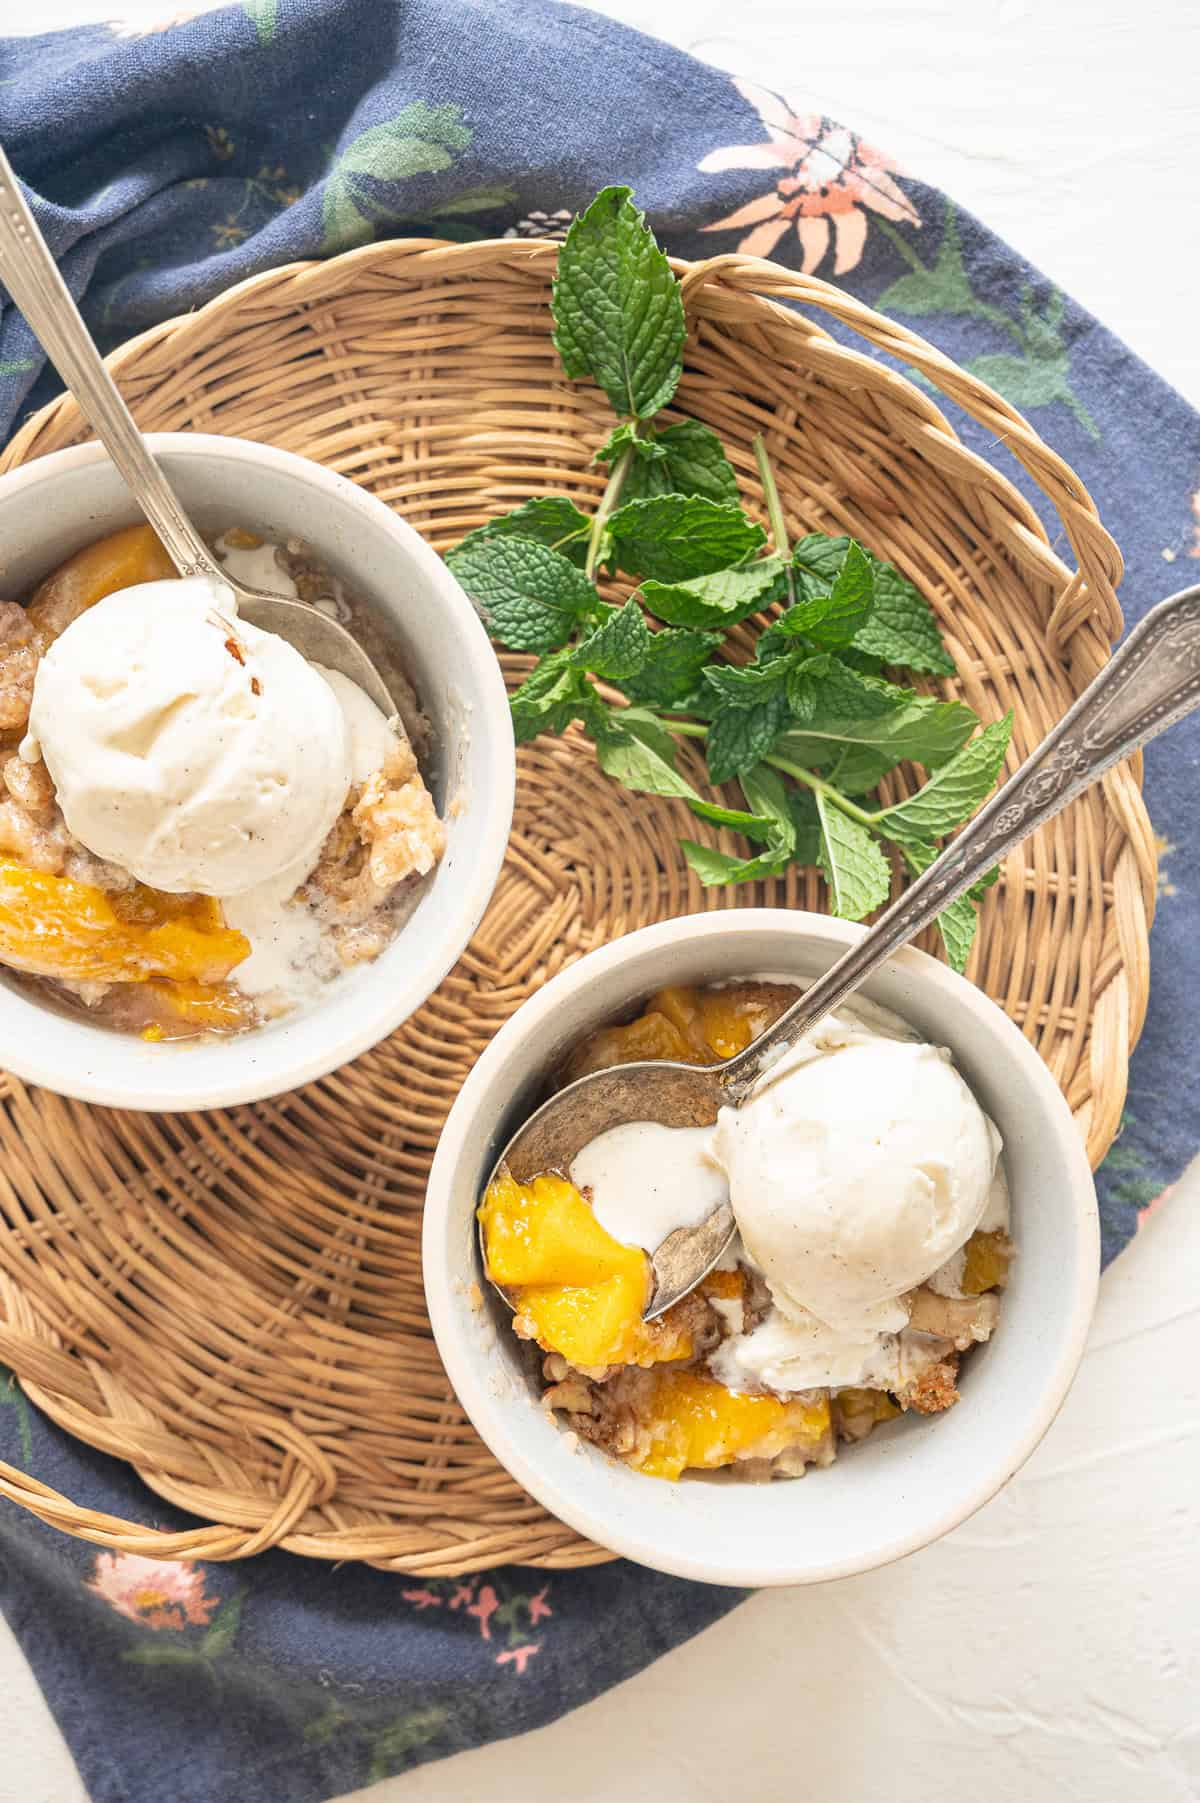 Two bowls of peach cobbler with ice cream on top and fresh mint next to them.